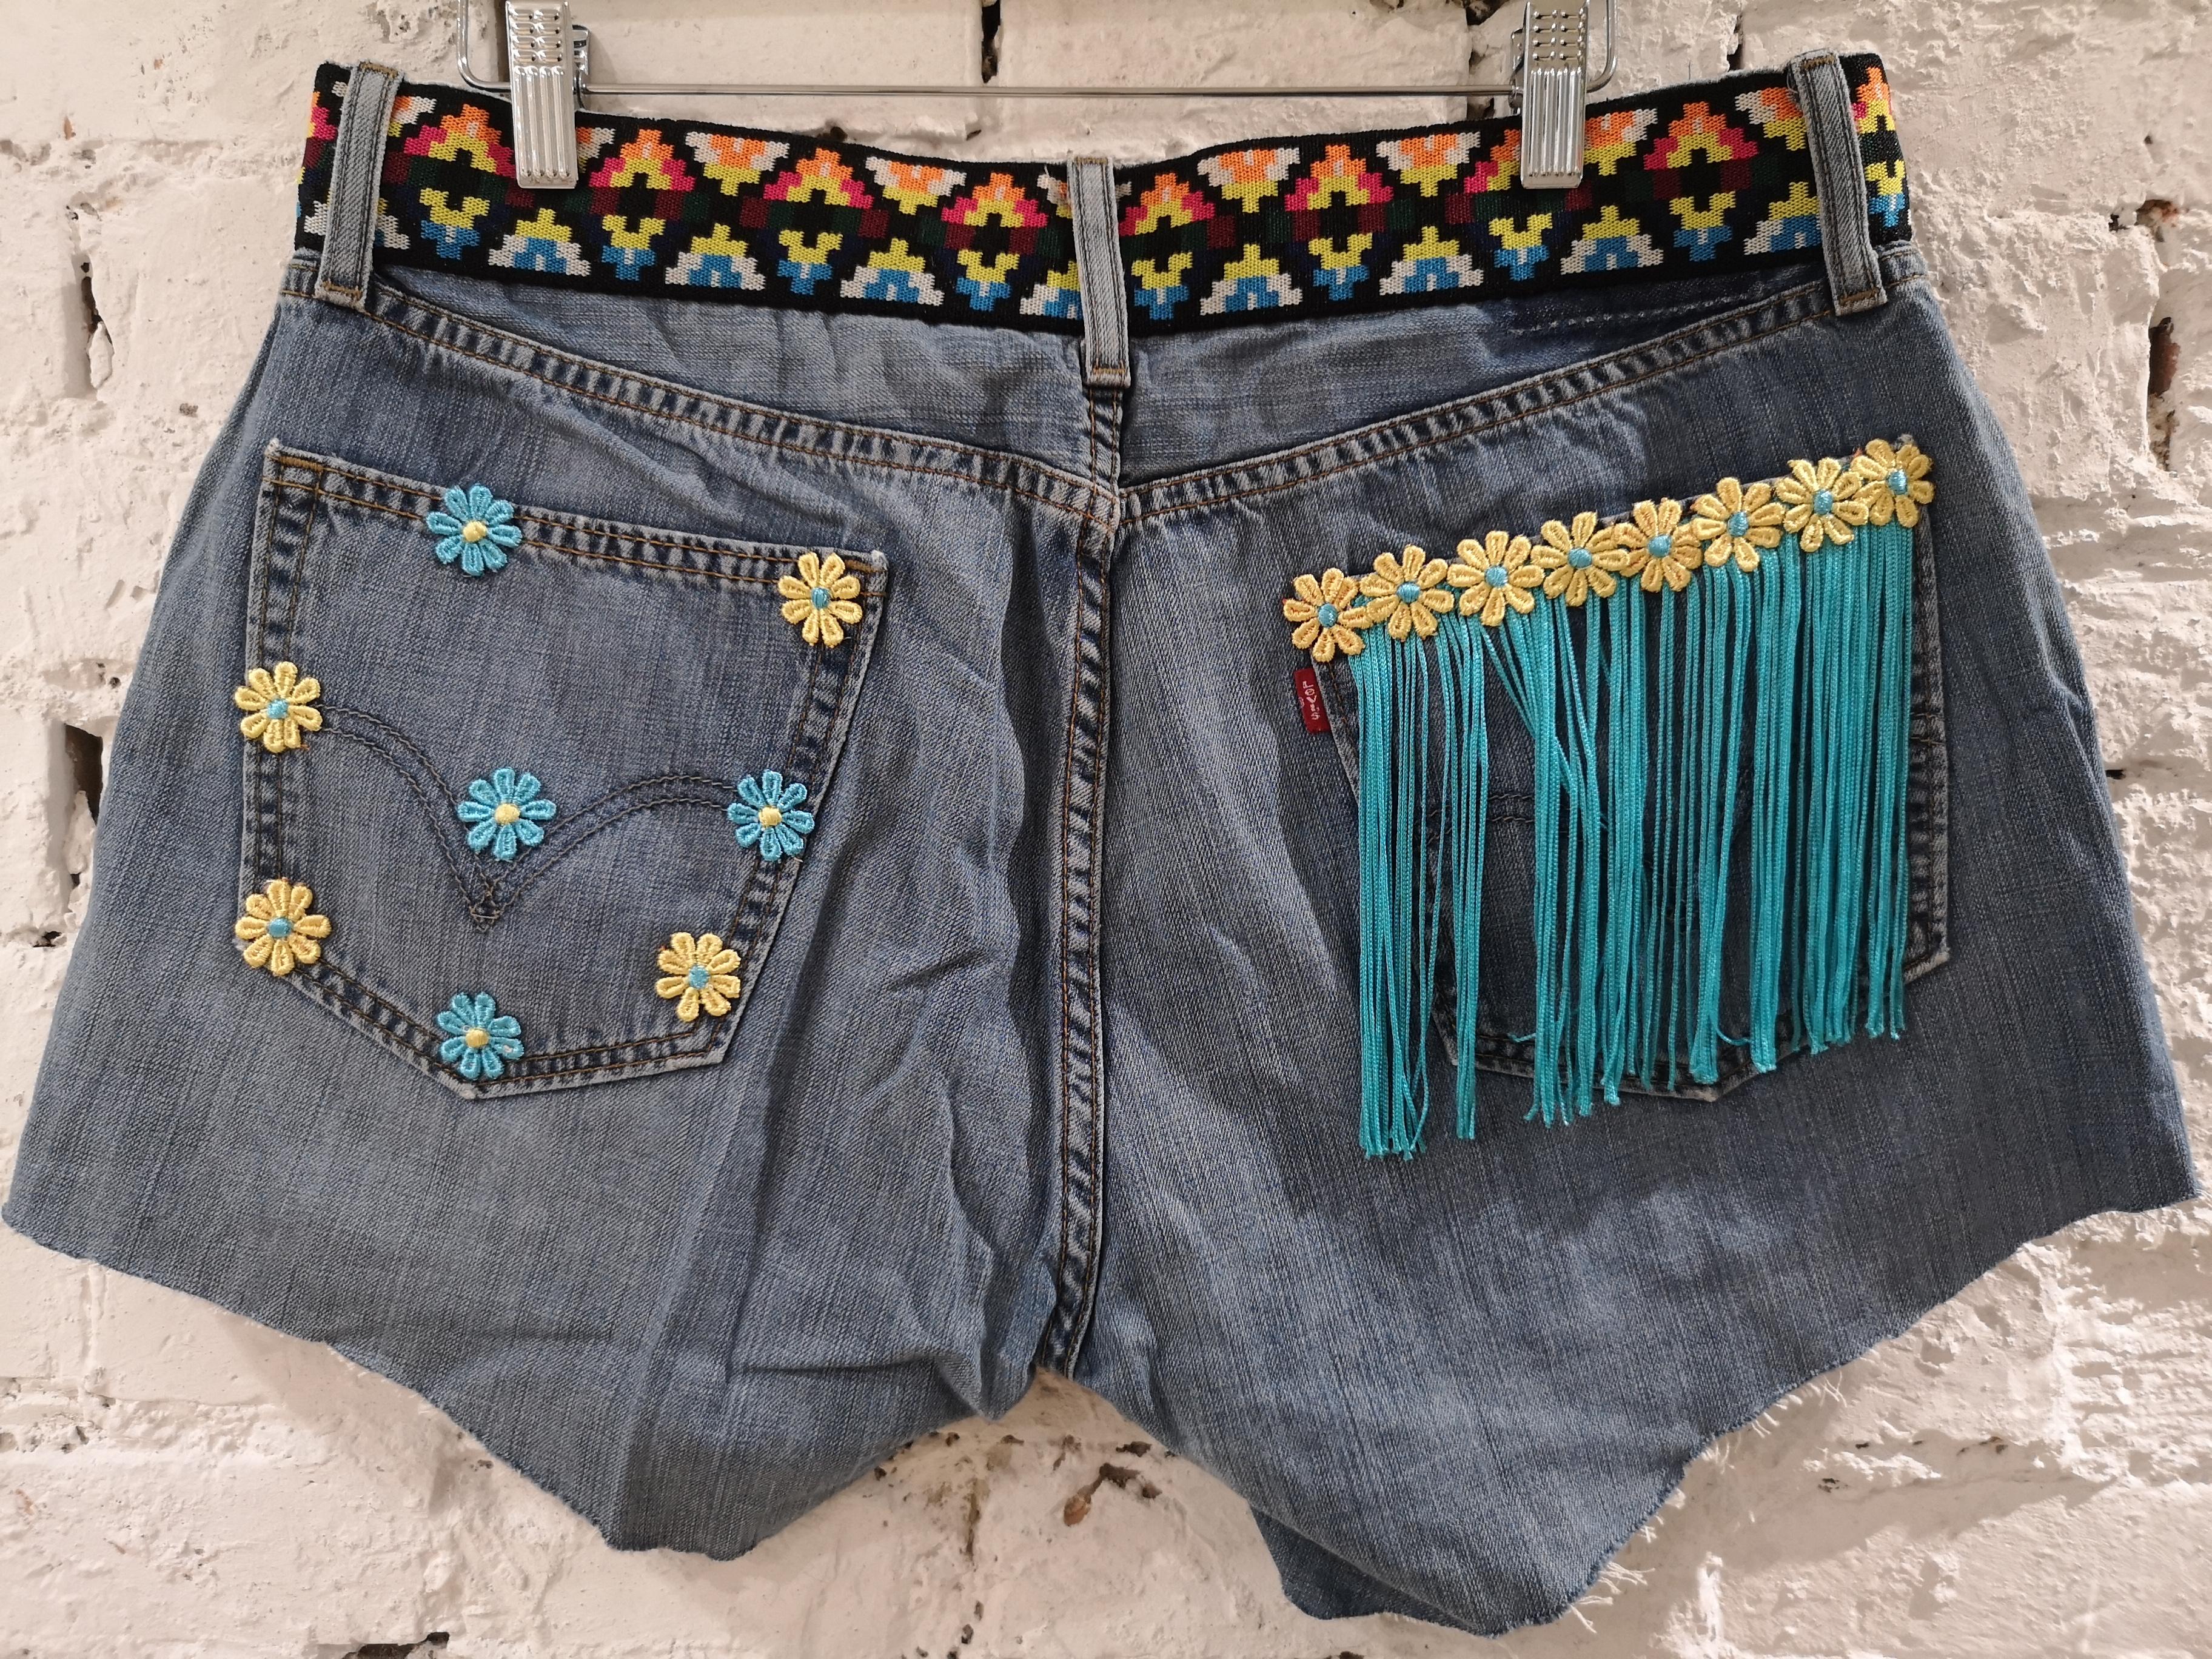 SOAB Blue cotton denim with flowers, passementerie and fringes shorts 4